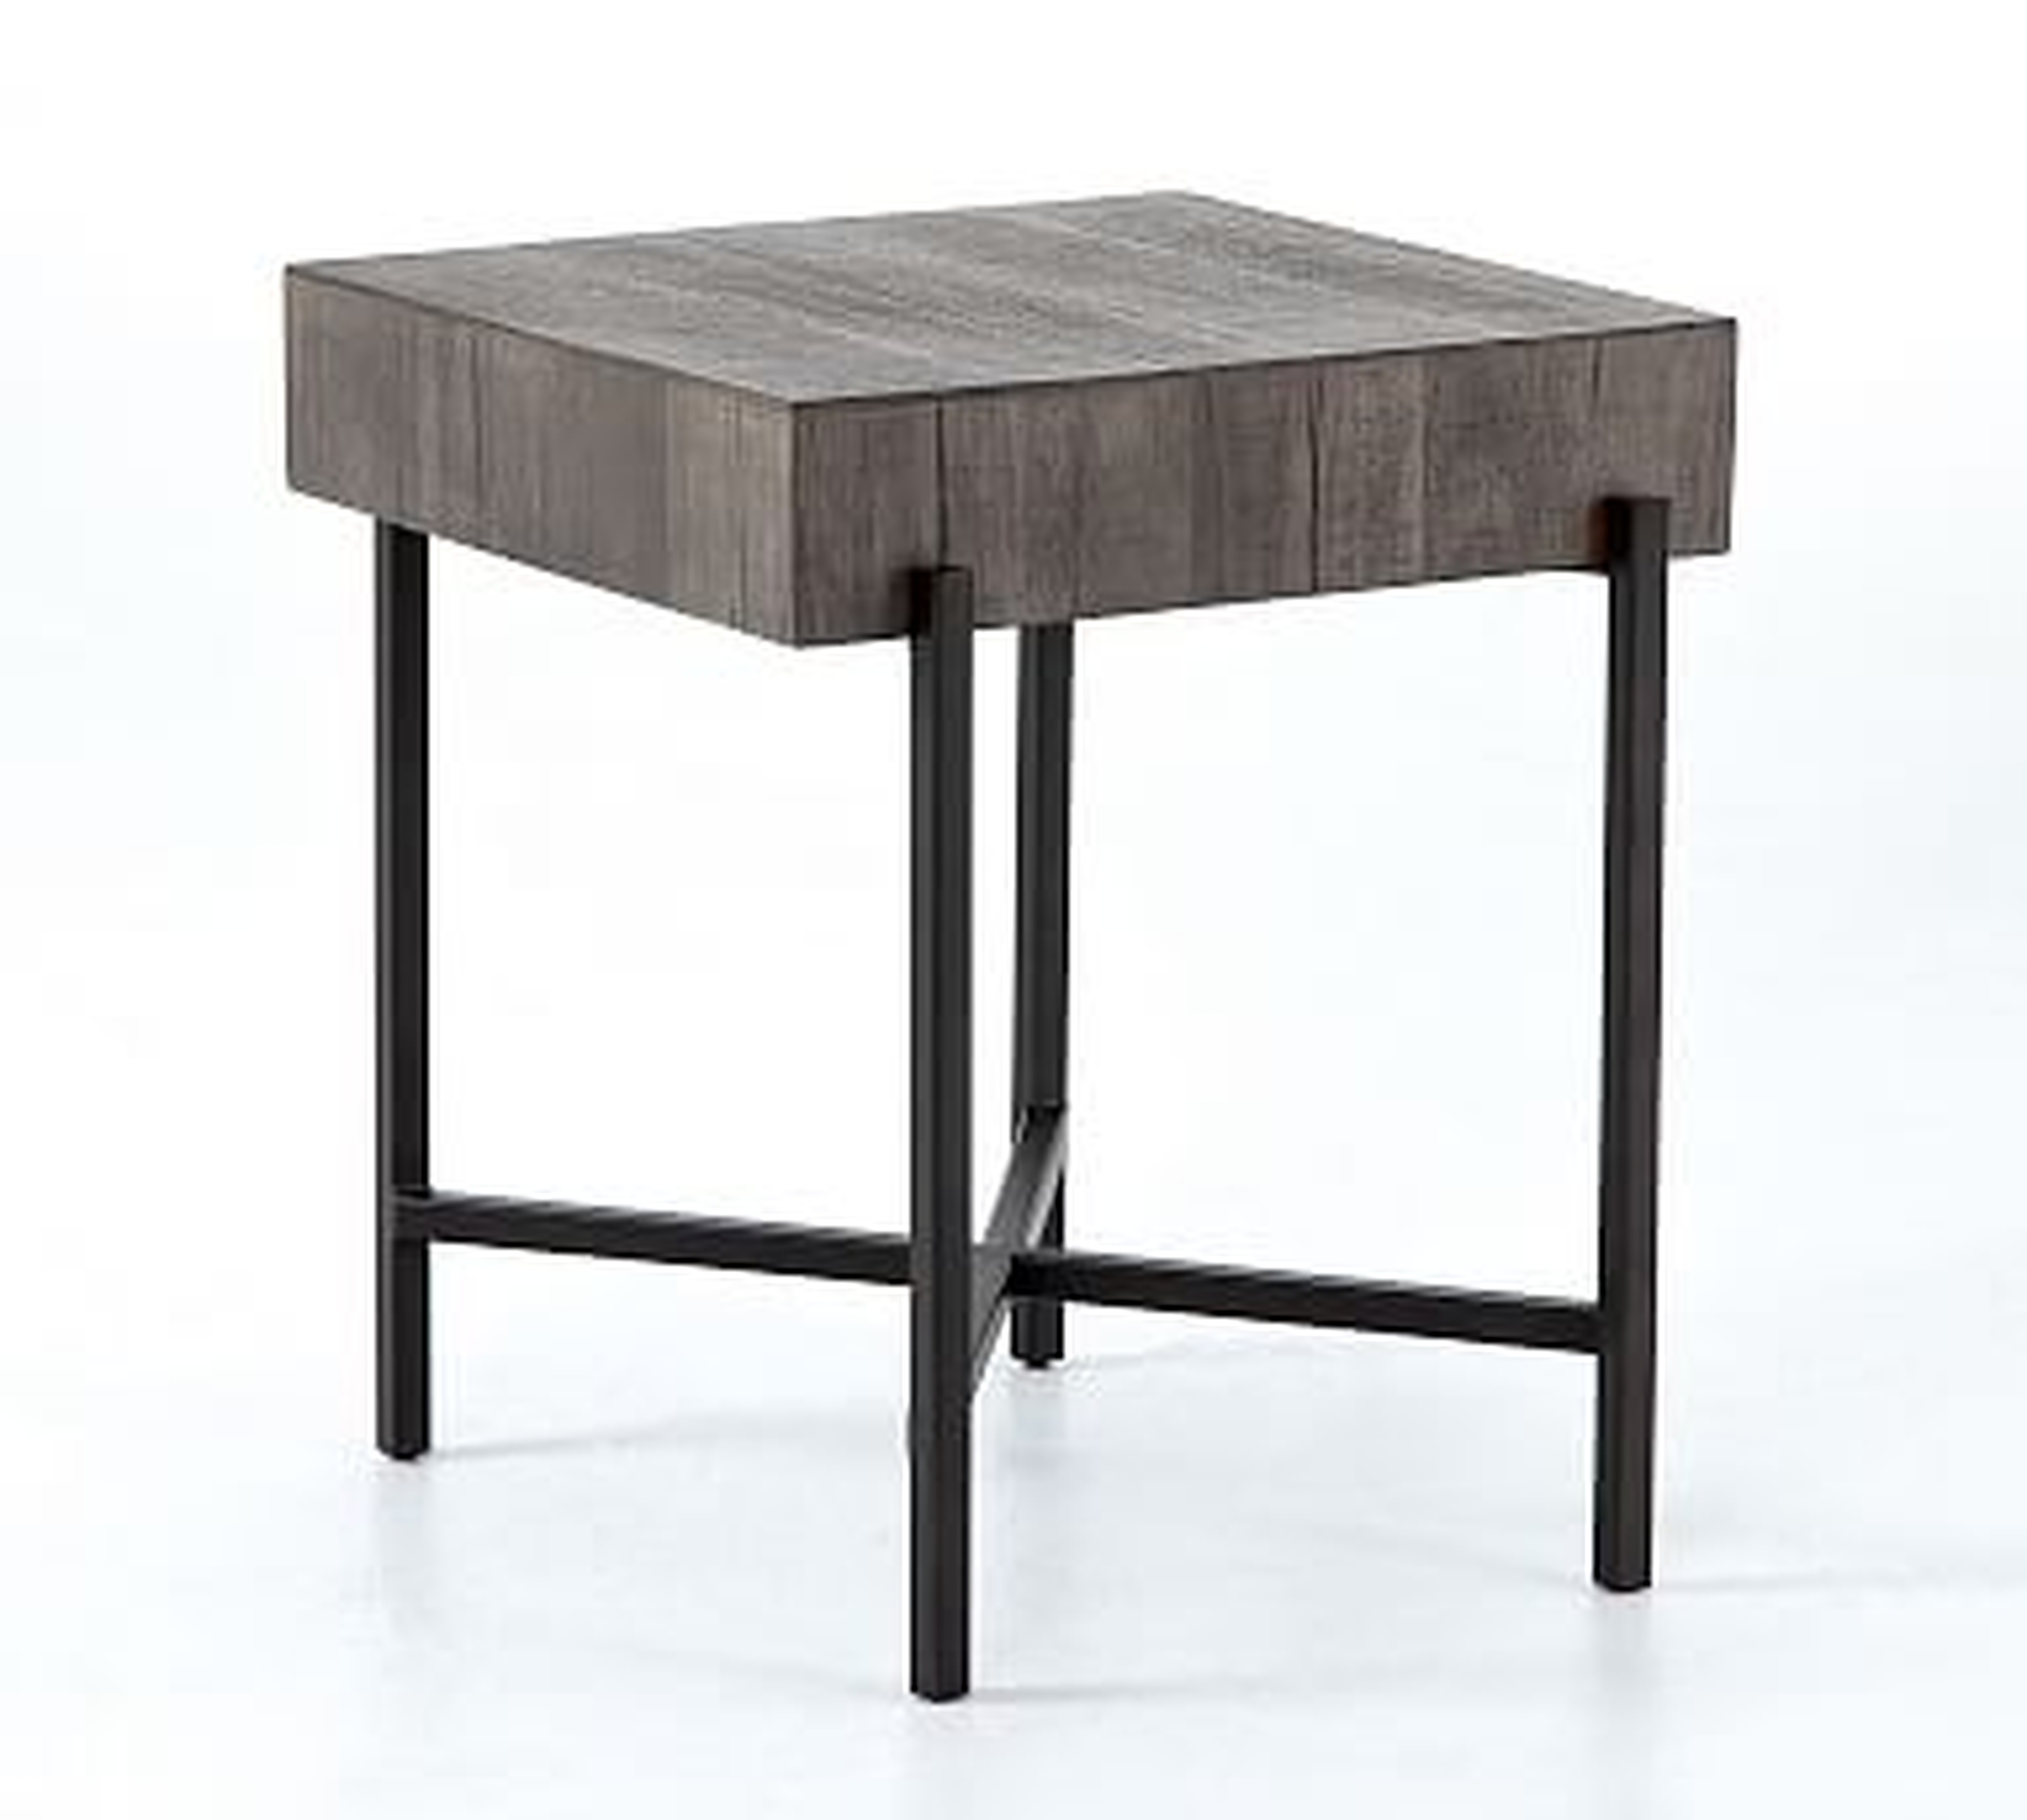 Fargo Reclaimed Wood End Table, Distressed Gray - Pottery Barn